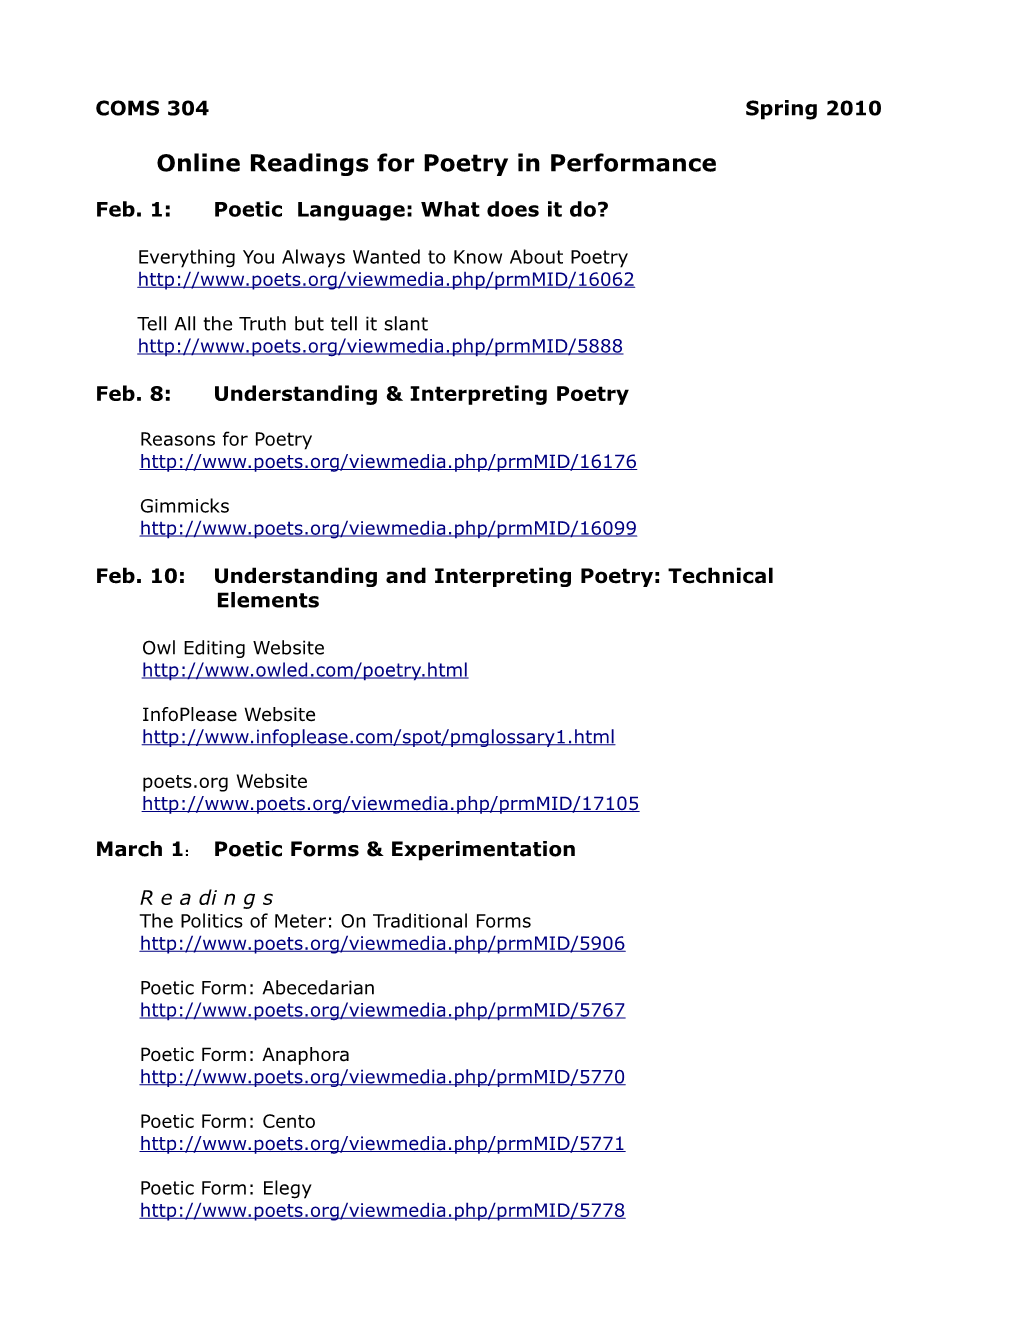 Online Readings for Poetry in Performance